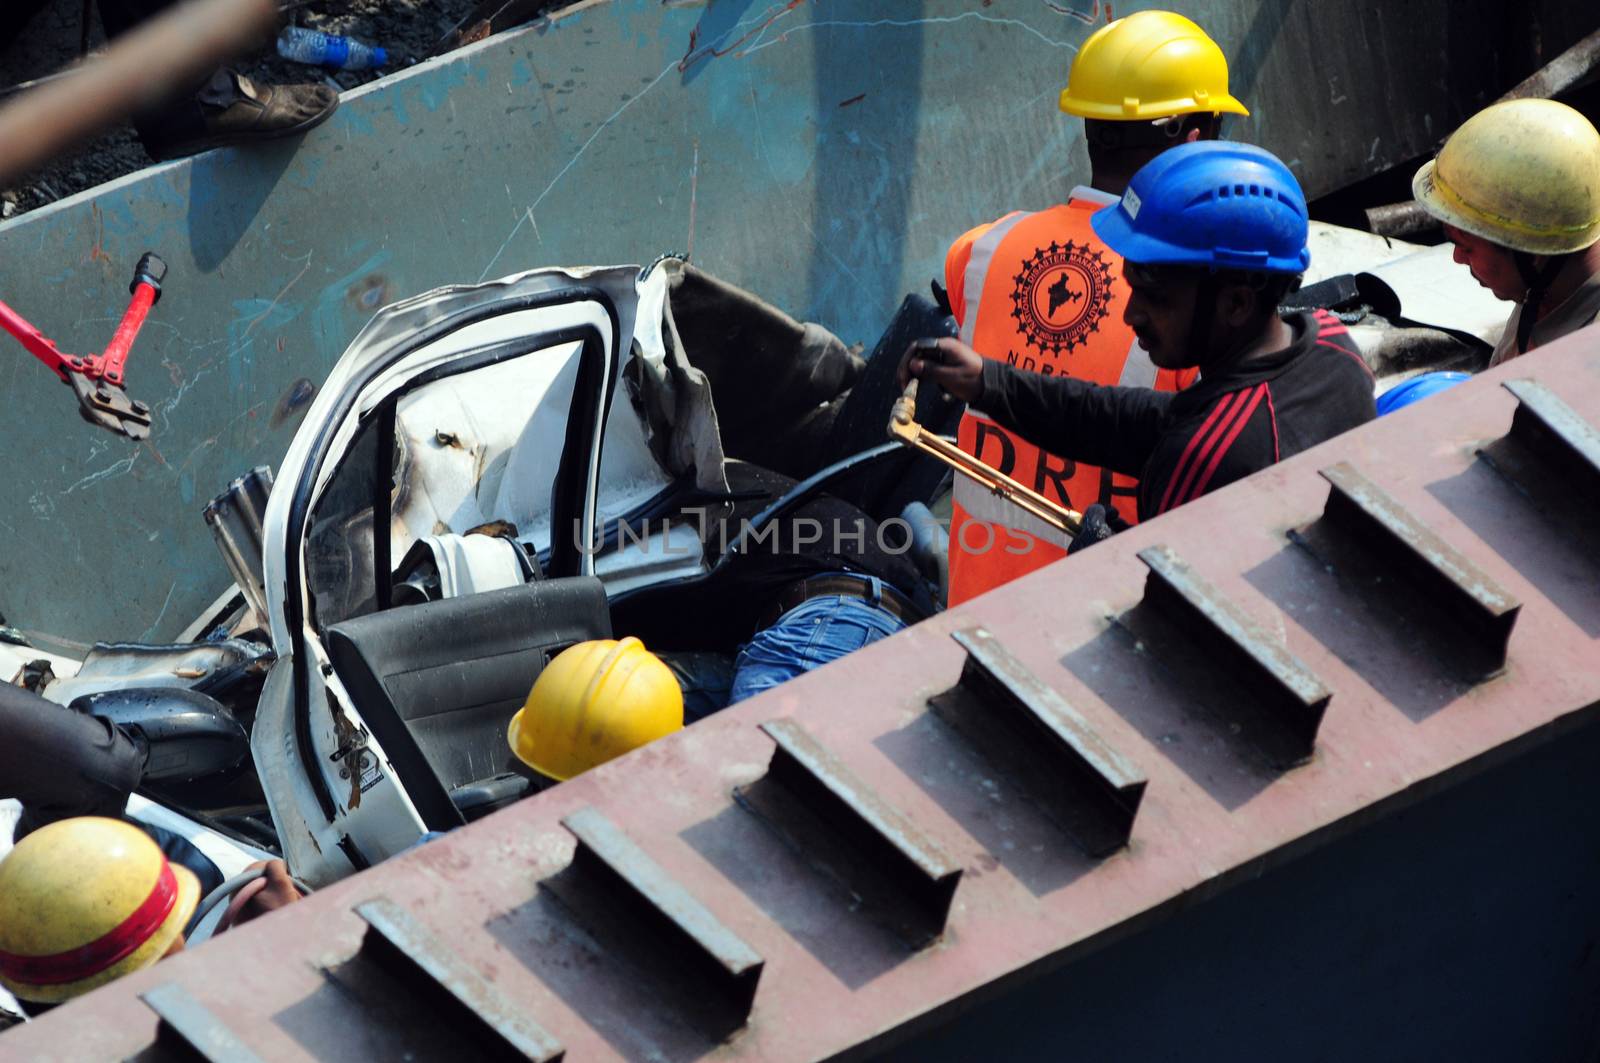 INDIA, Kolkata: Indian rescue workers and volunteers try to free people trapped under the wreckage of a collapsed flyover bridge in Kolkata on March 31, 2016. At least 14 people were killed and dozens more injured when a flyover collapsed in a busy Indian city on March 31, an official said, as emergency workers battled to rescue people trapped under the rubble.